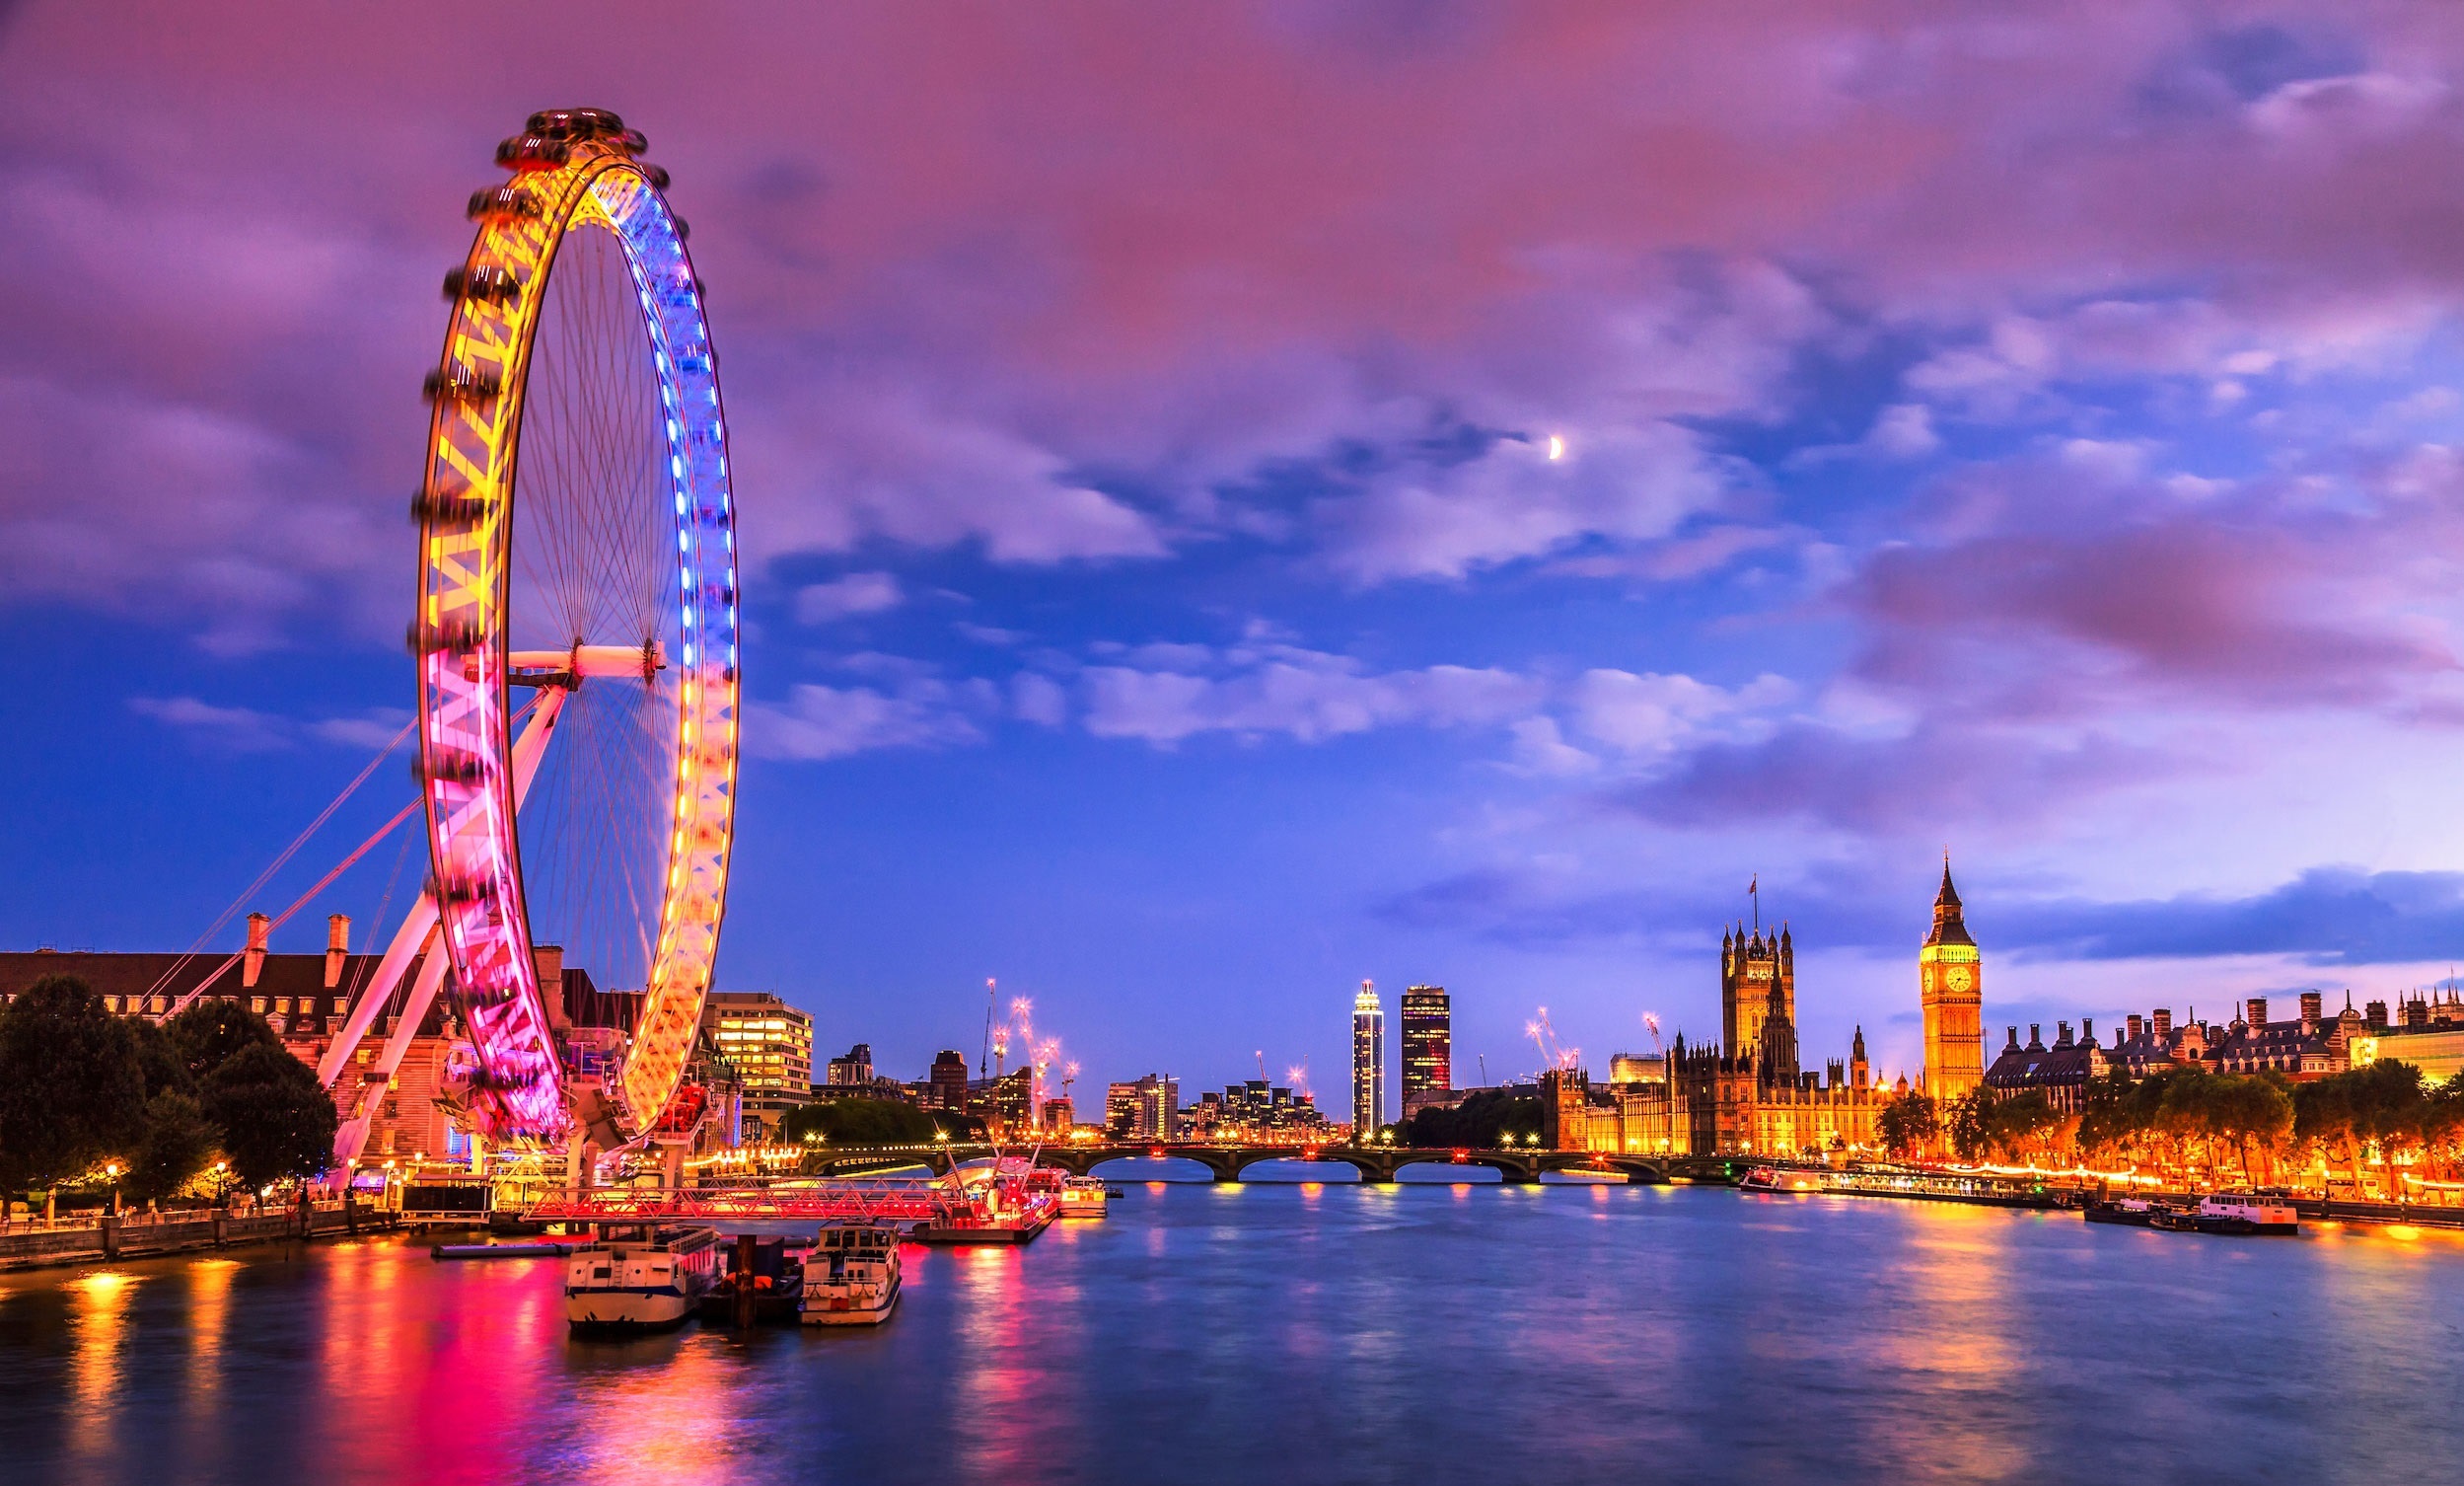 SUMMER IN LONDON, THE MOST VISITED DESTINATION 2019